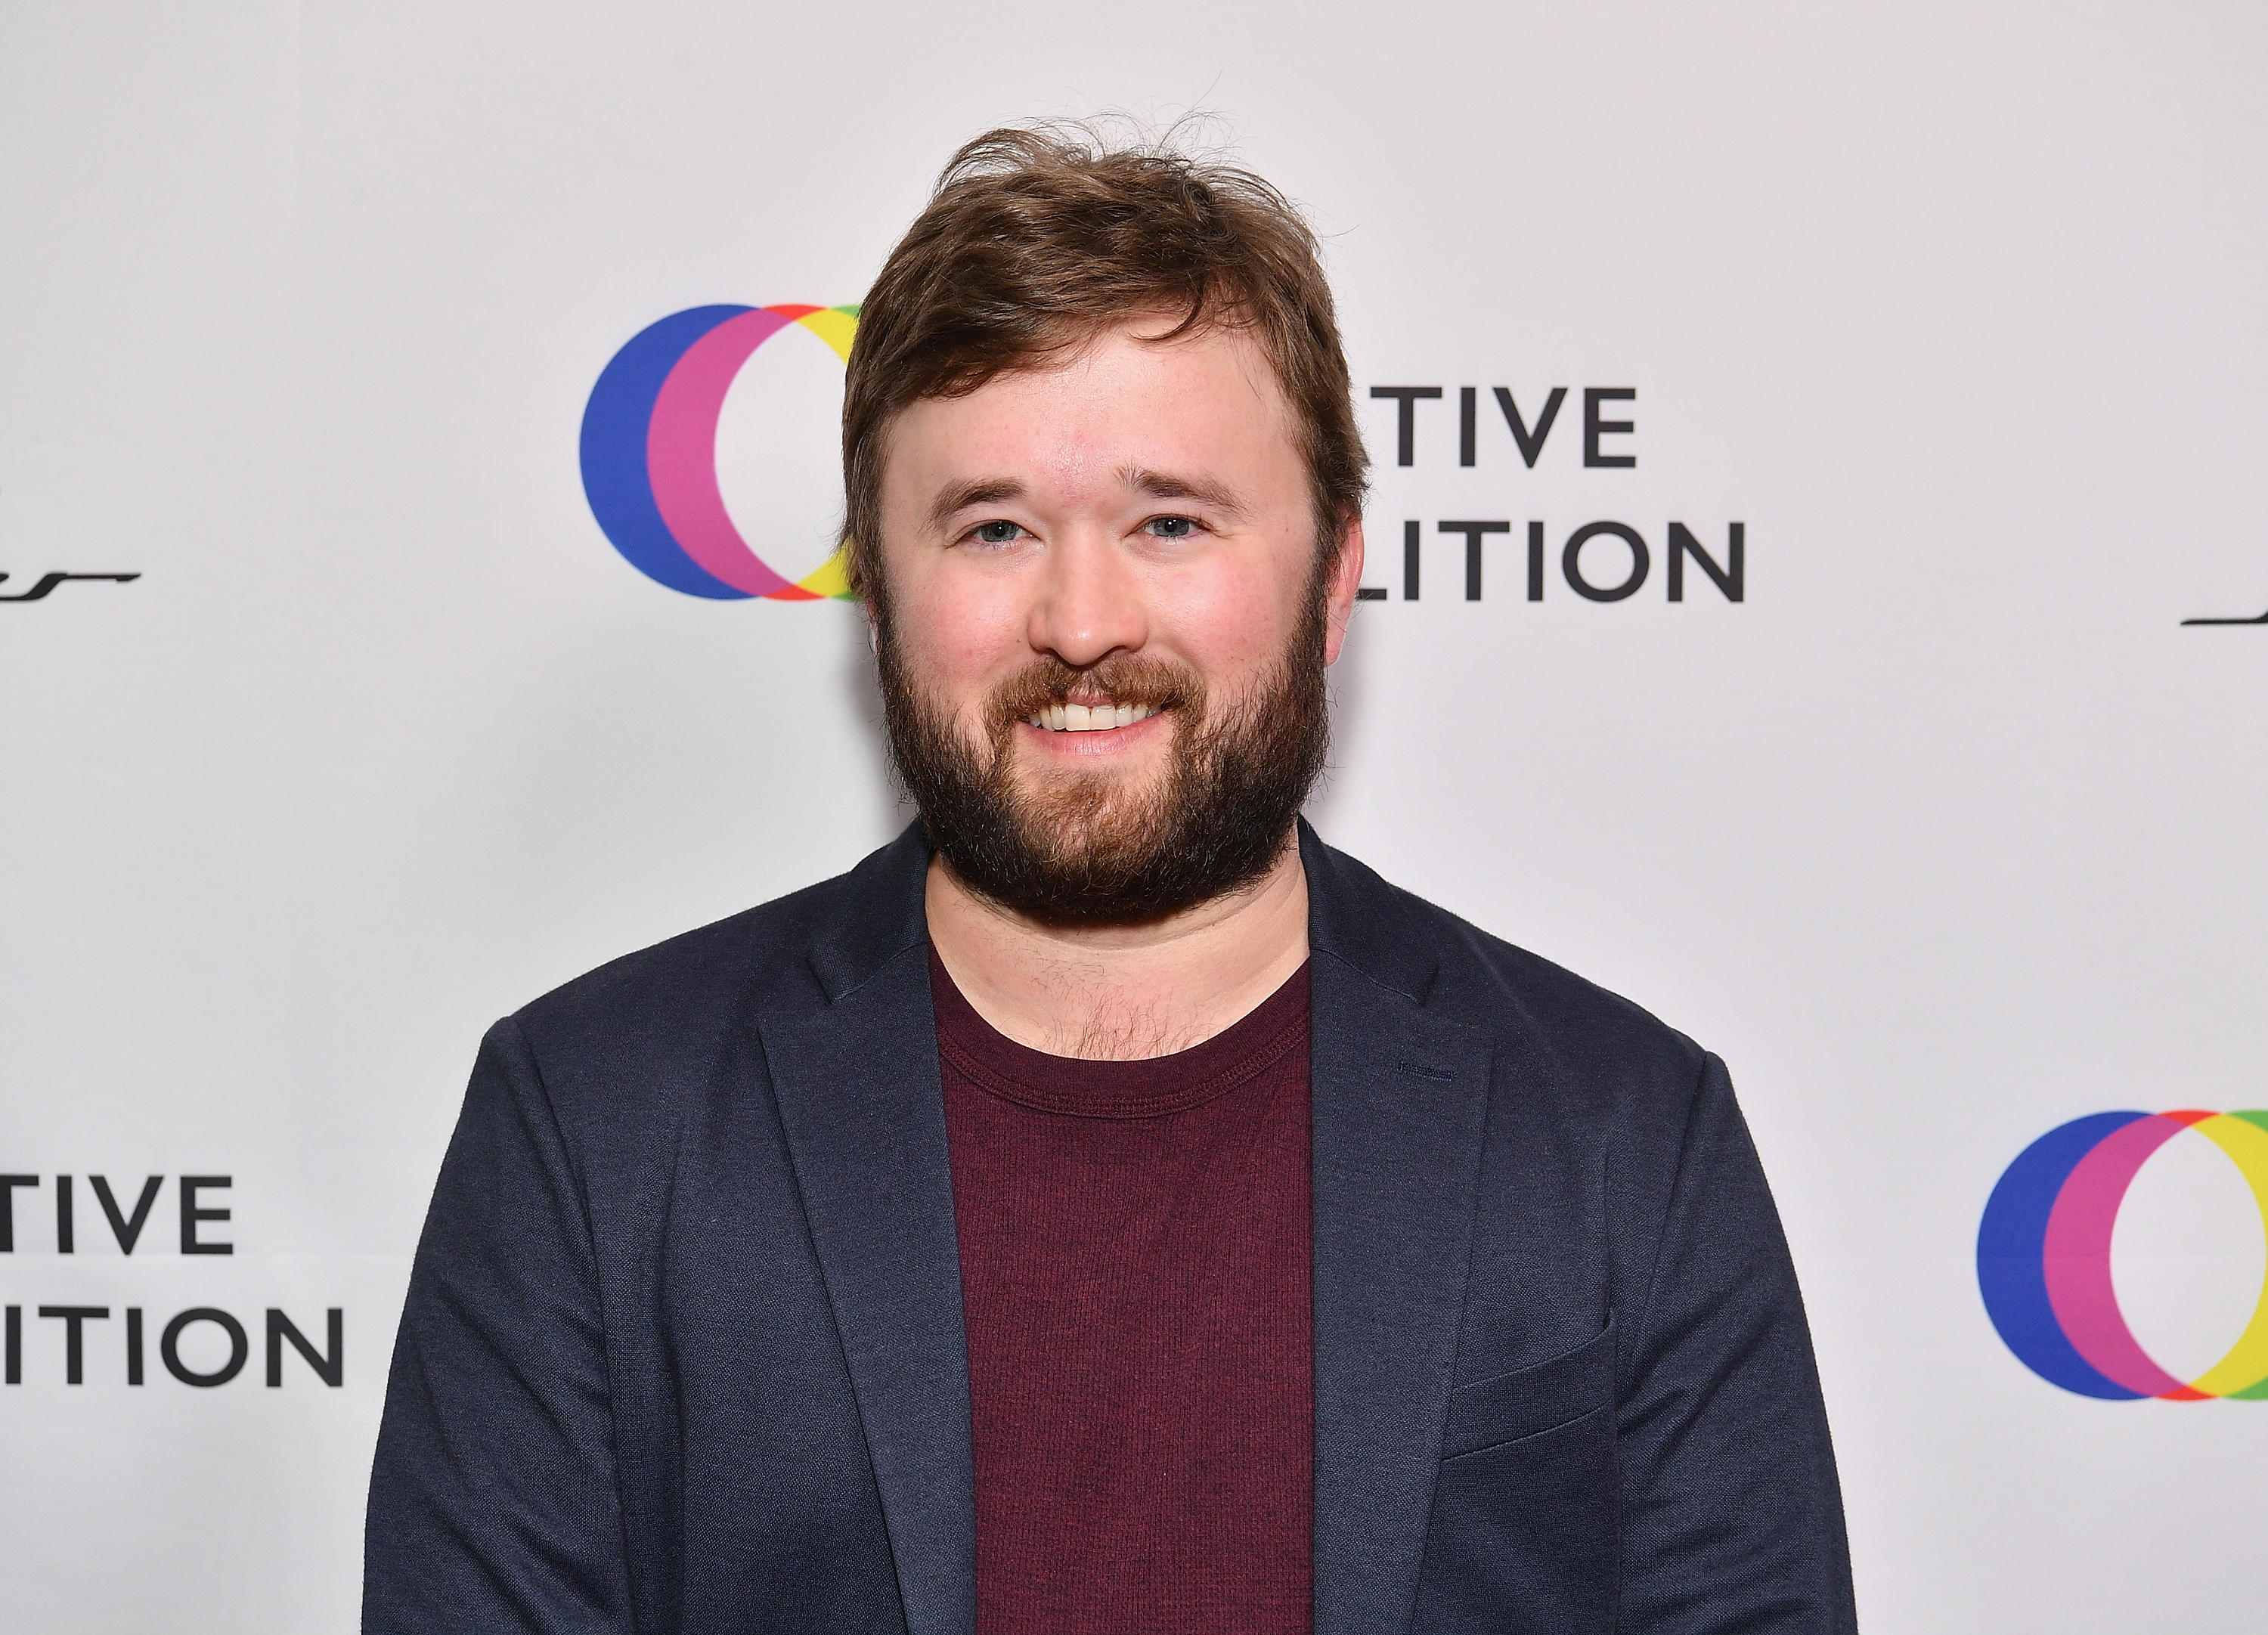 Haley Joel Osment attends the 2018 Spotlight Initiative Awards Gala Dinner at Kia Supper Suite on January 21, 2018 in Park City, Utah. | Source: Getty Images